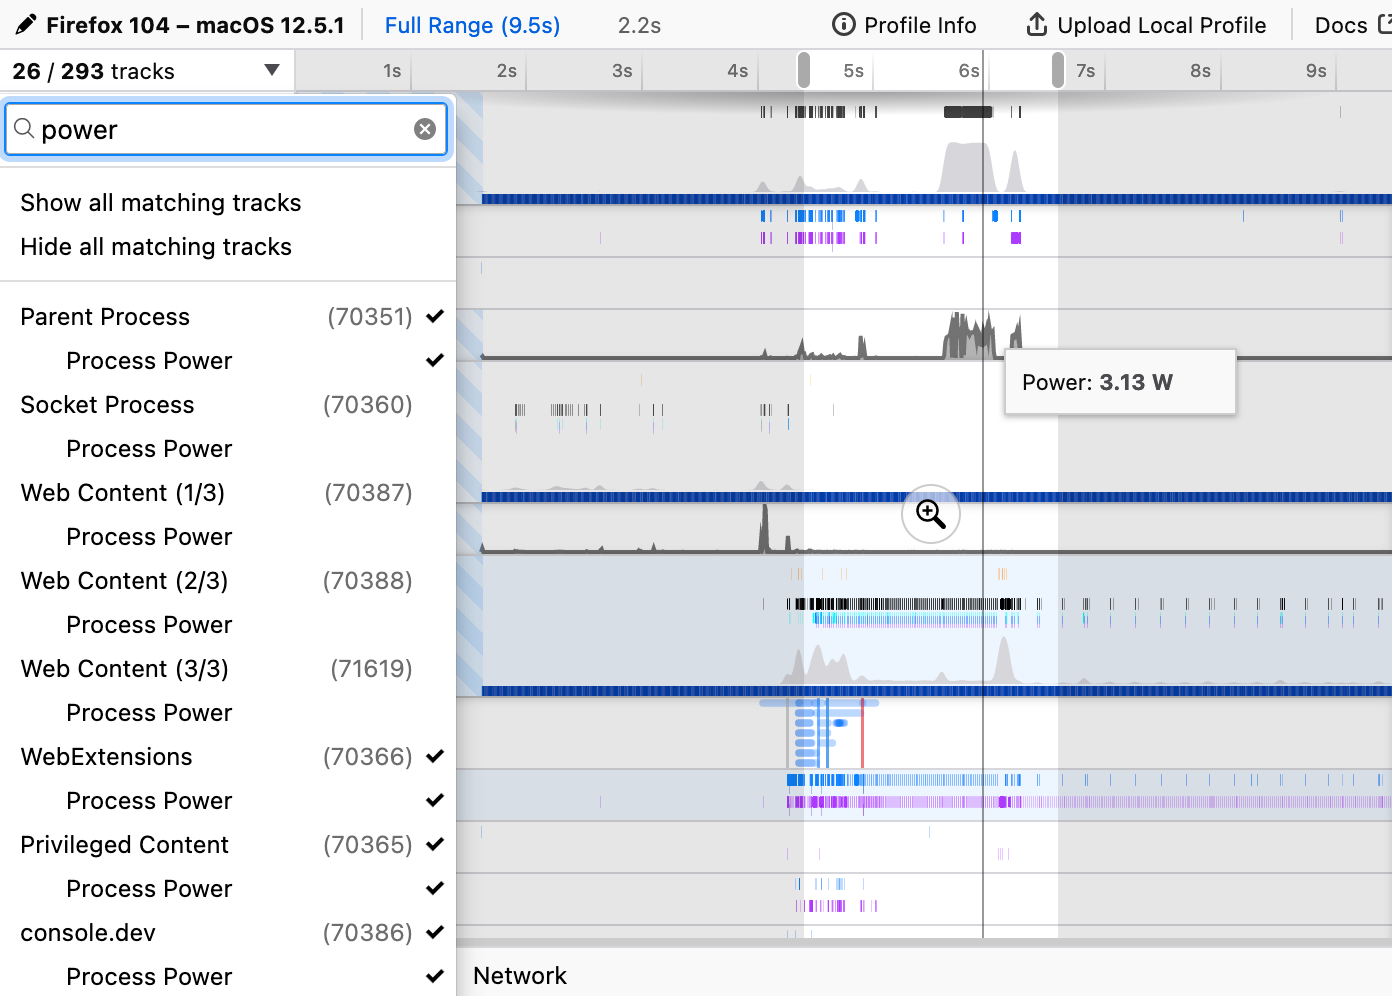 Screenshot of a power profile capture in Firefox 104 on macOS.